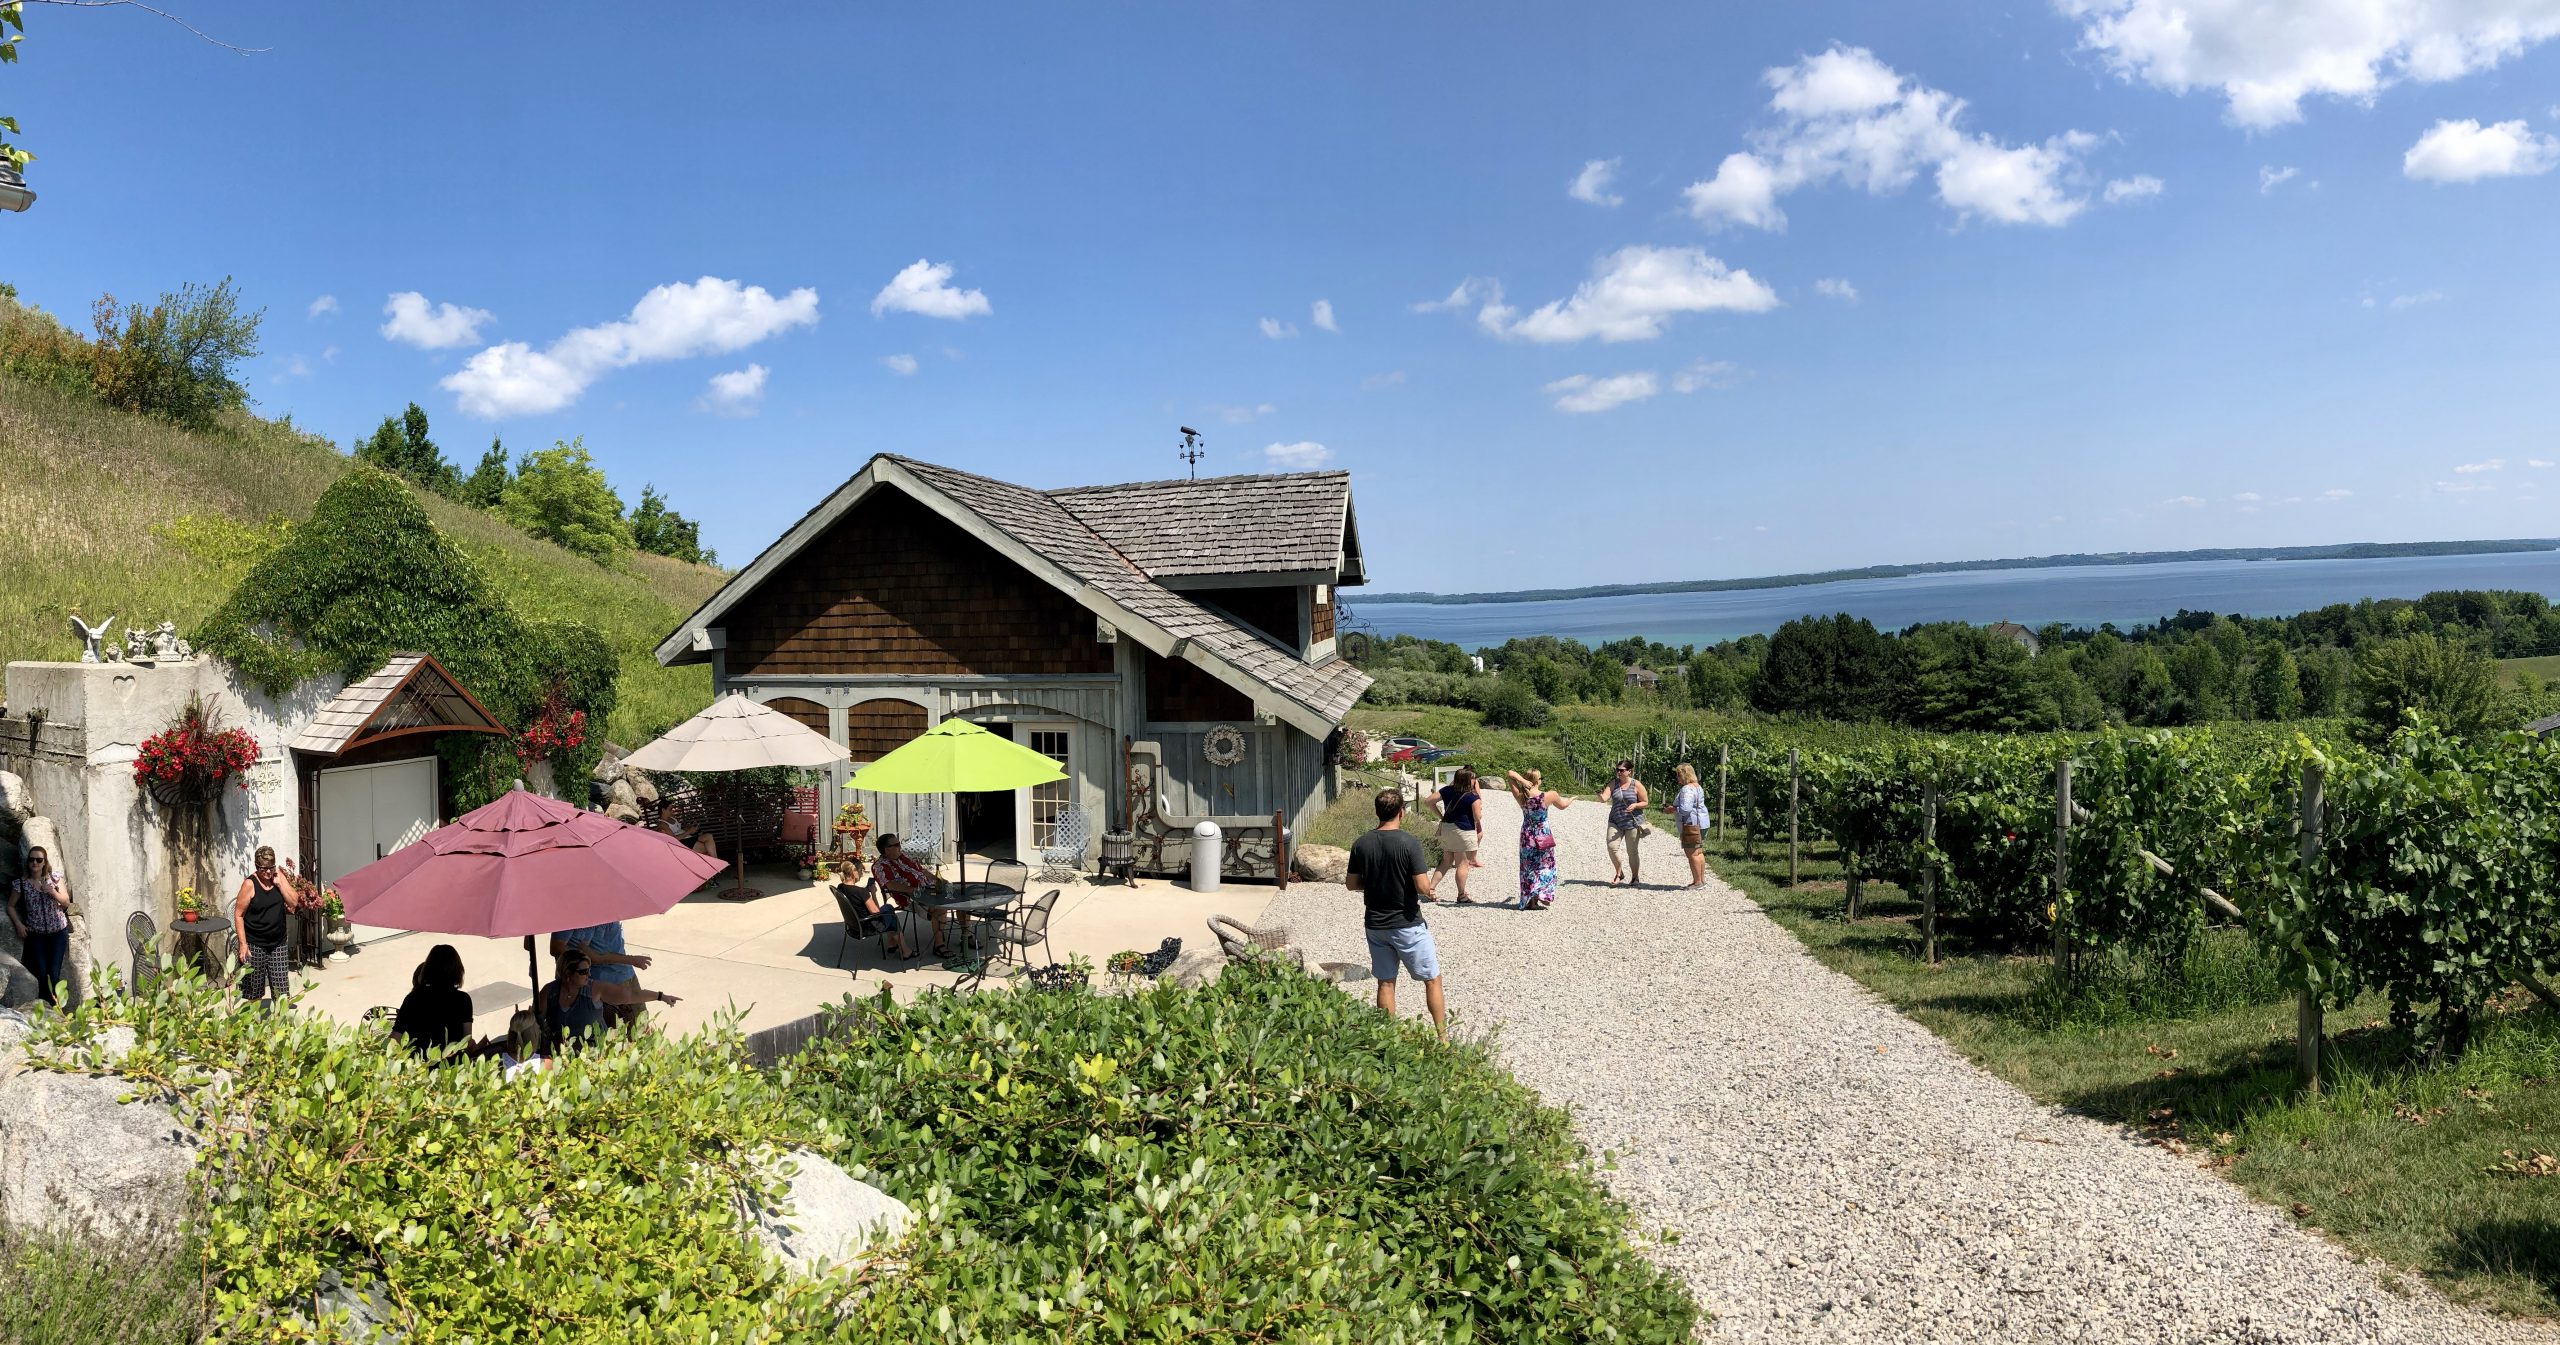 My Favorite Traverse City Wineries for Yum Wine and Views